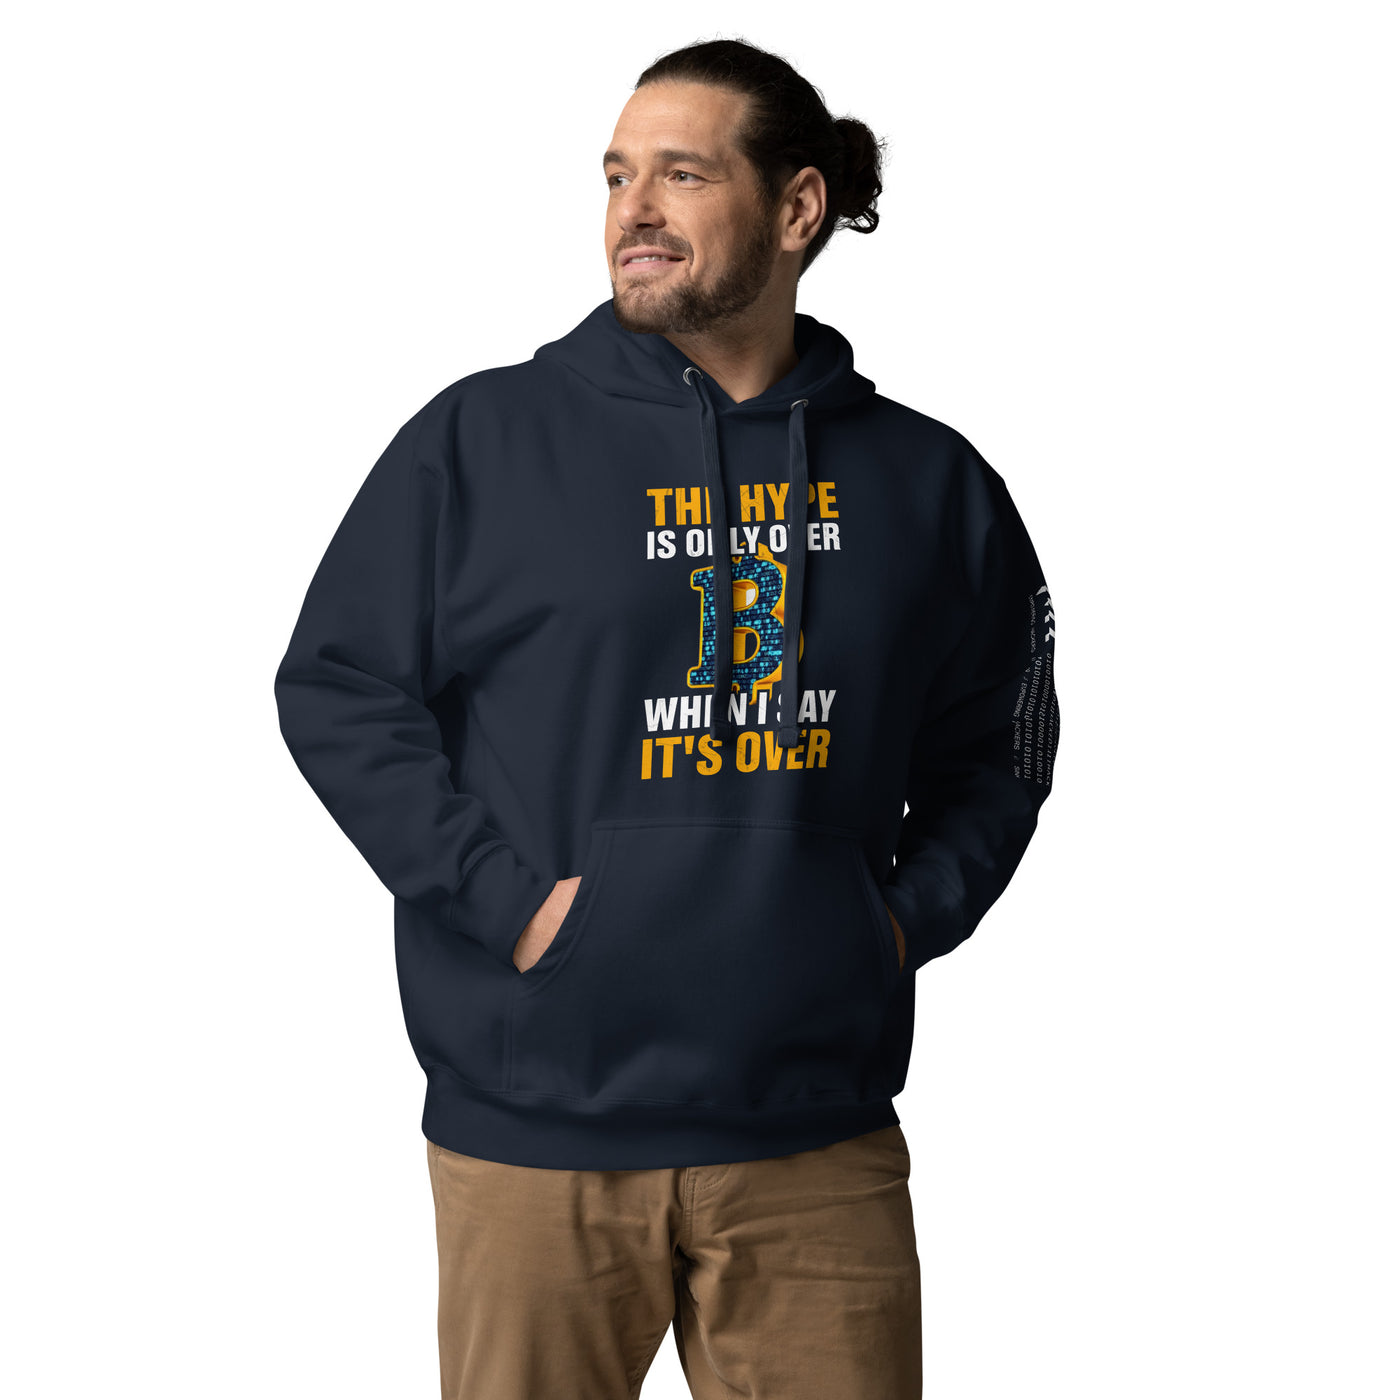 Bitcoin: The Hype is only over, when I said it's over - Unisex Hoodie